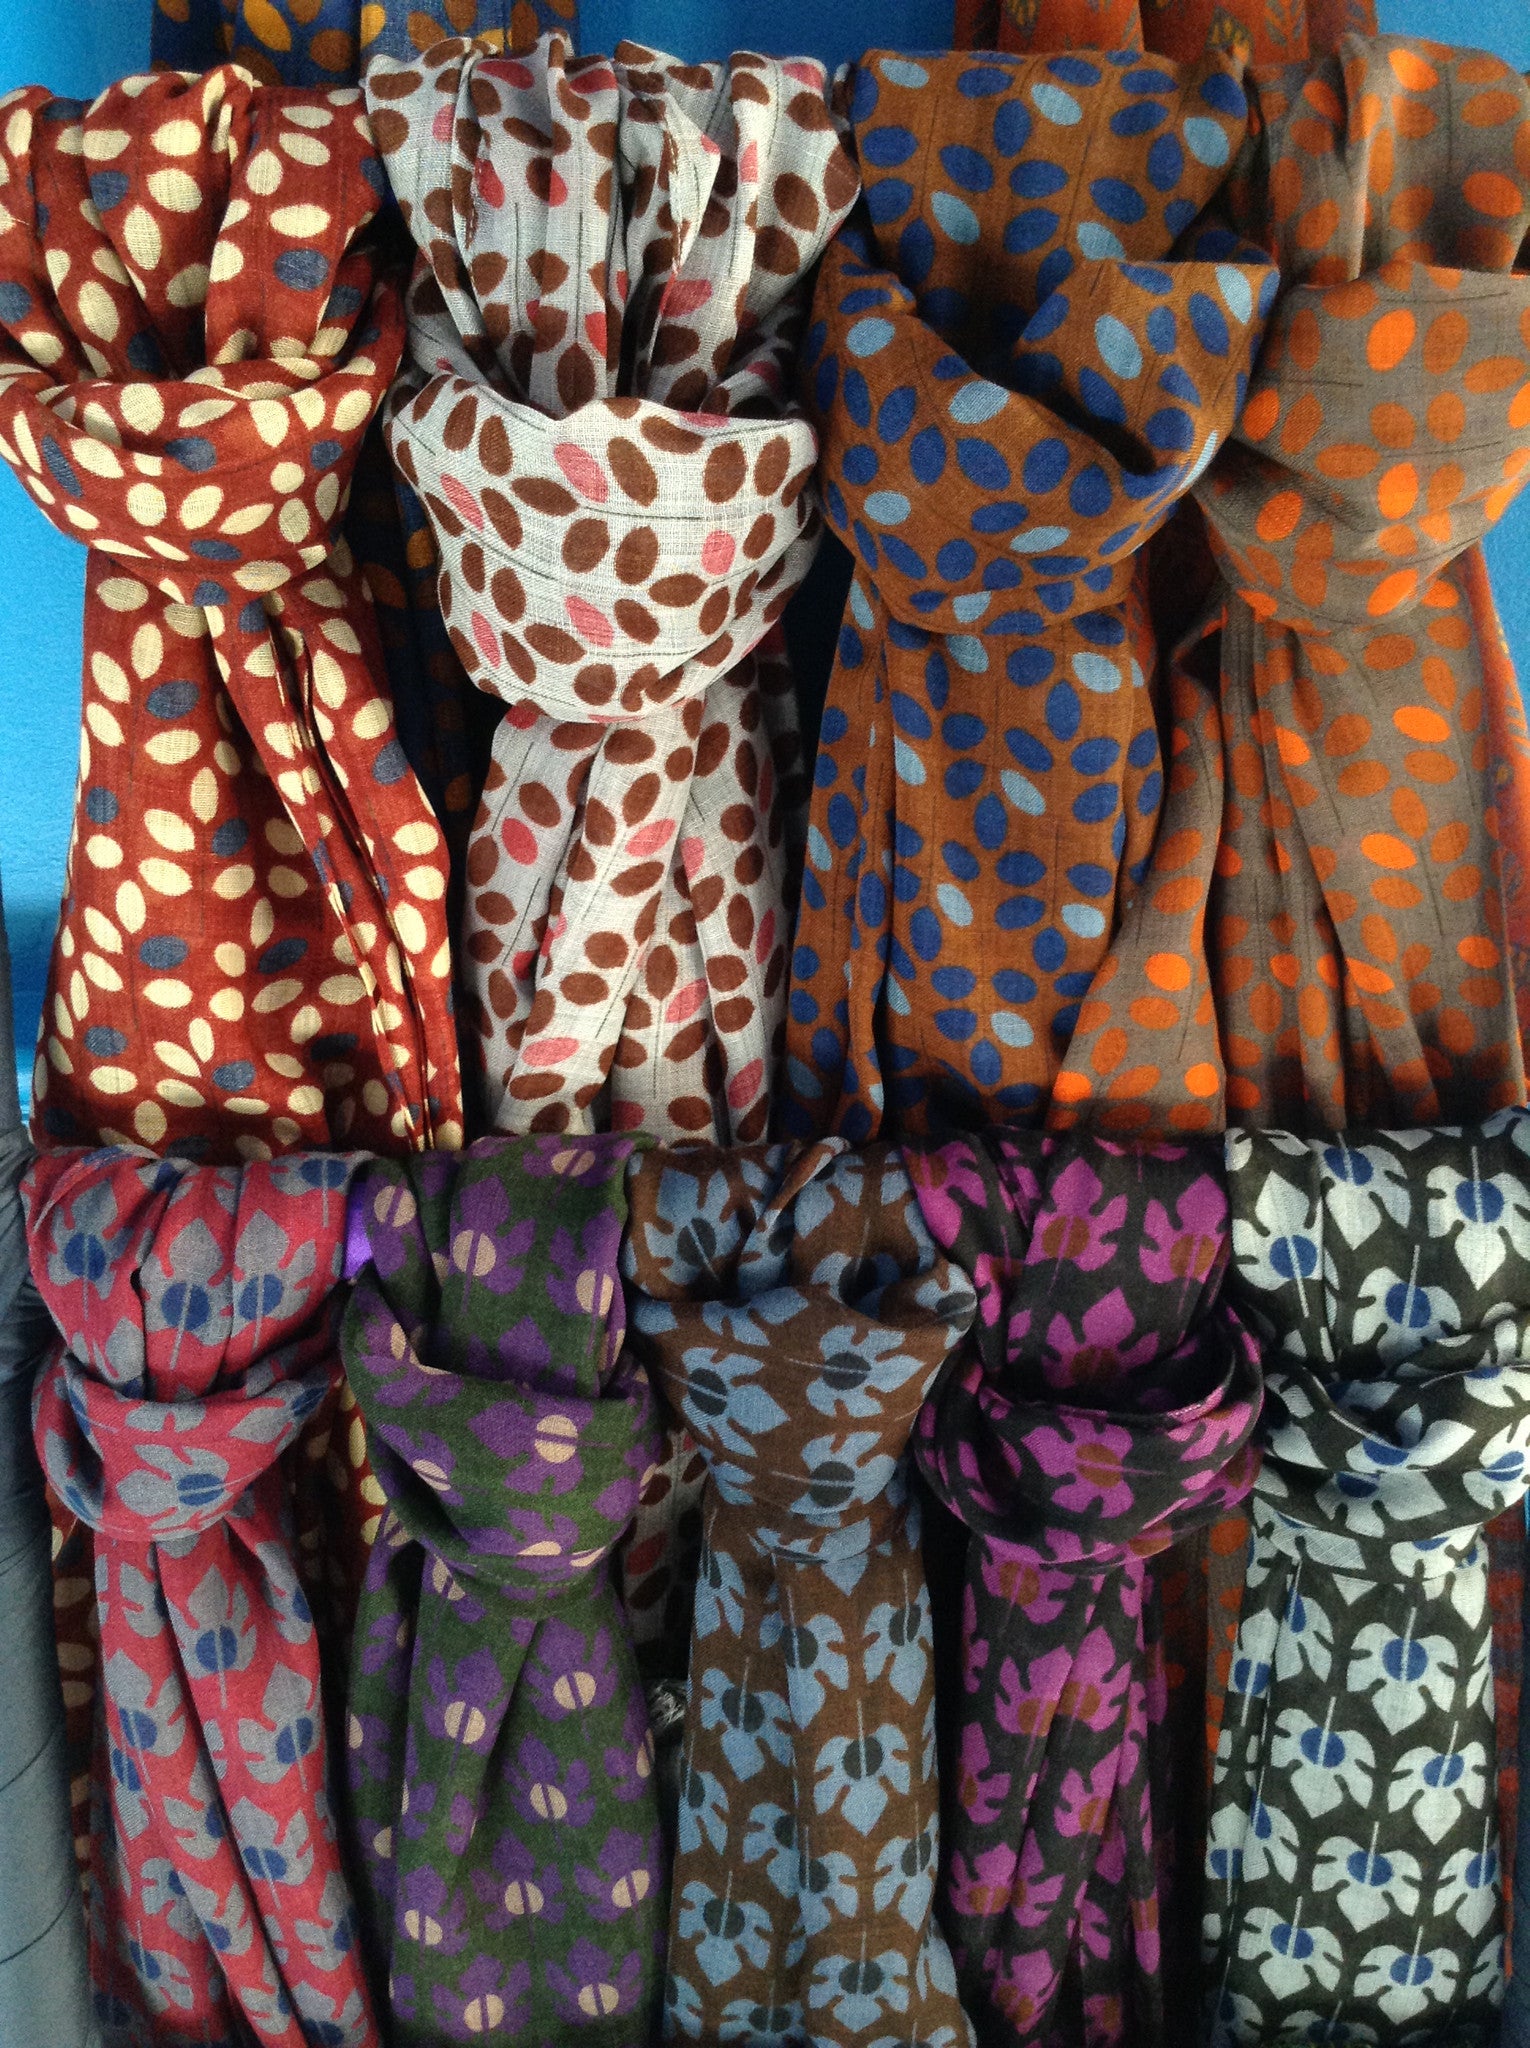 Bundle Up This Holiday Season with our SALE Wool & Silk Scarves!